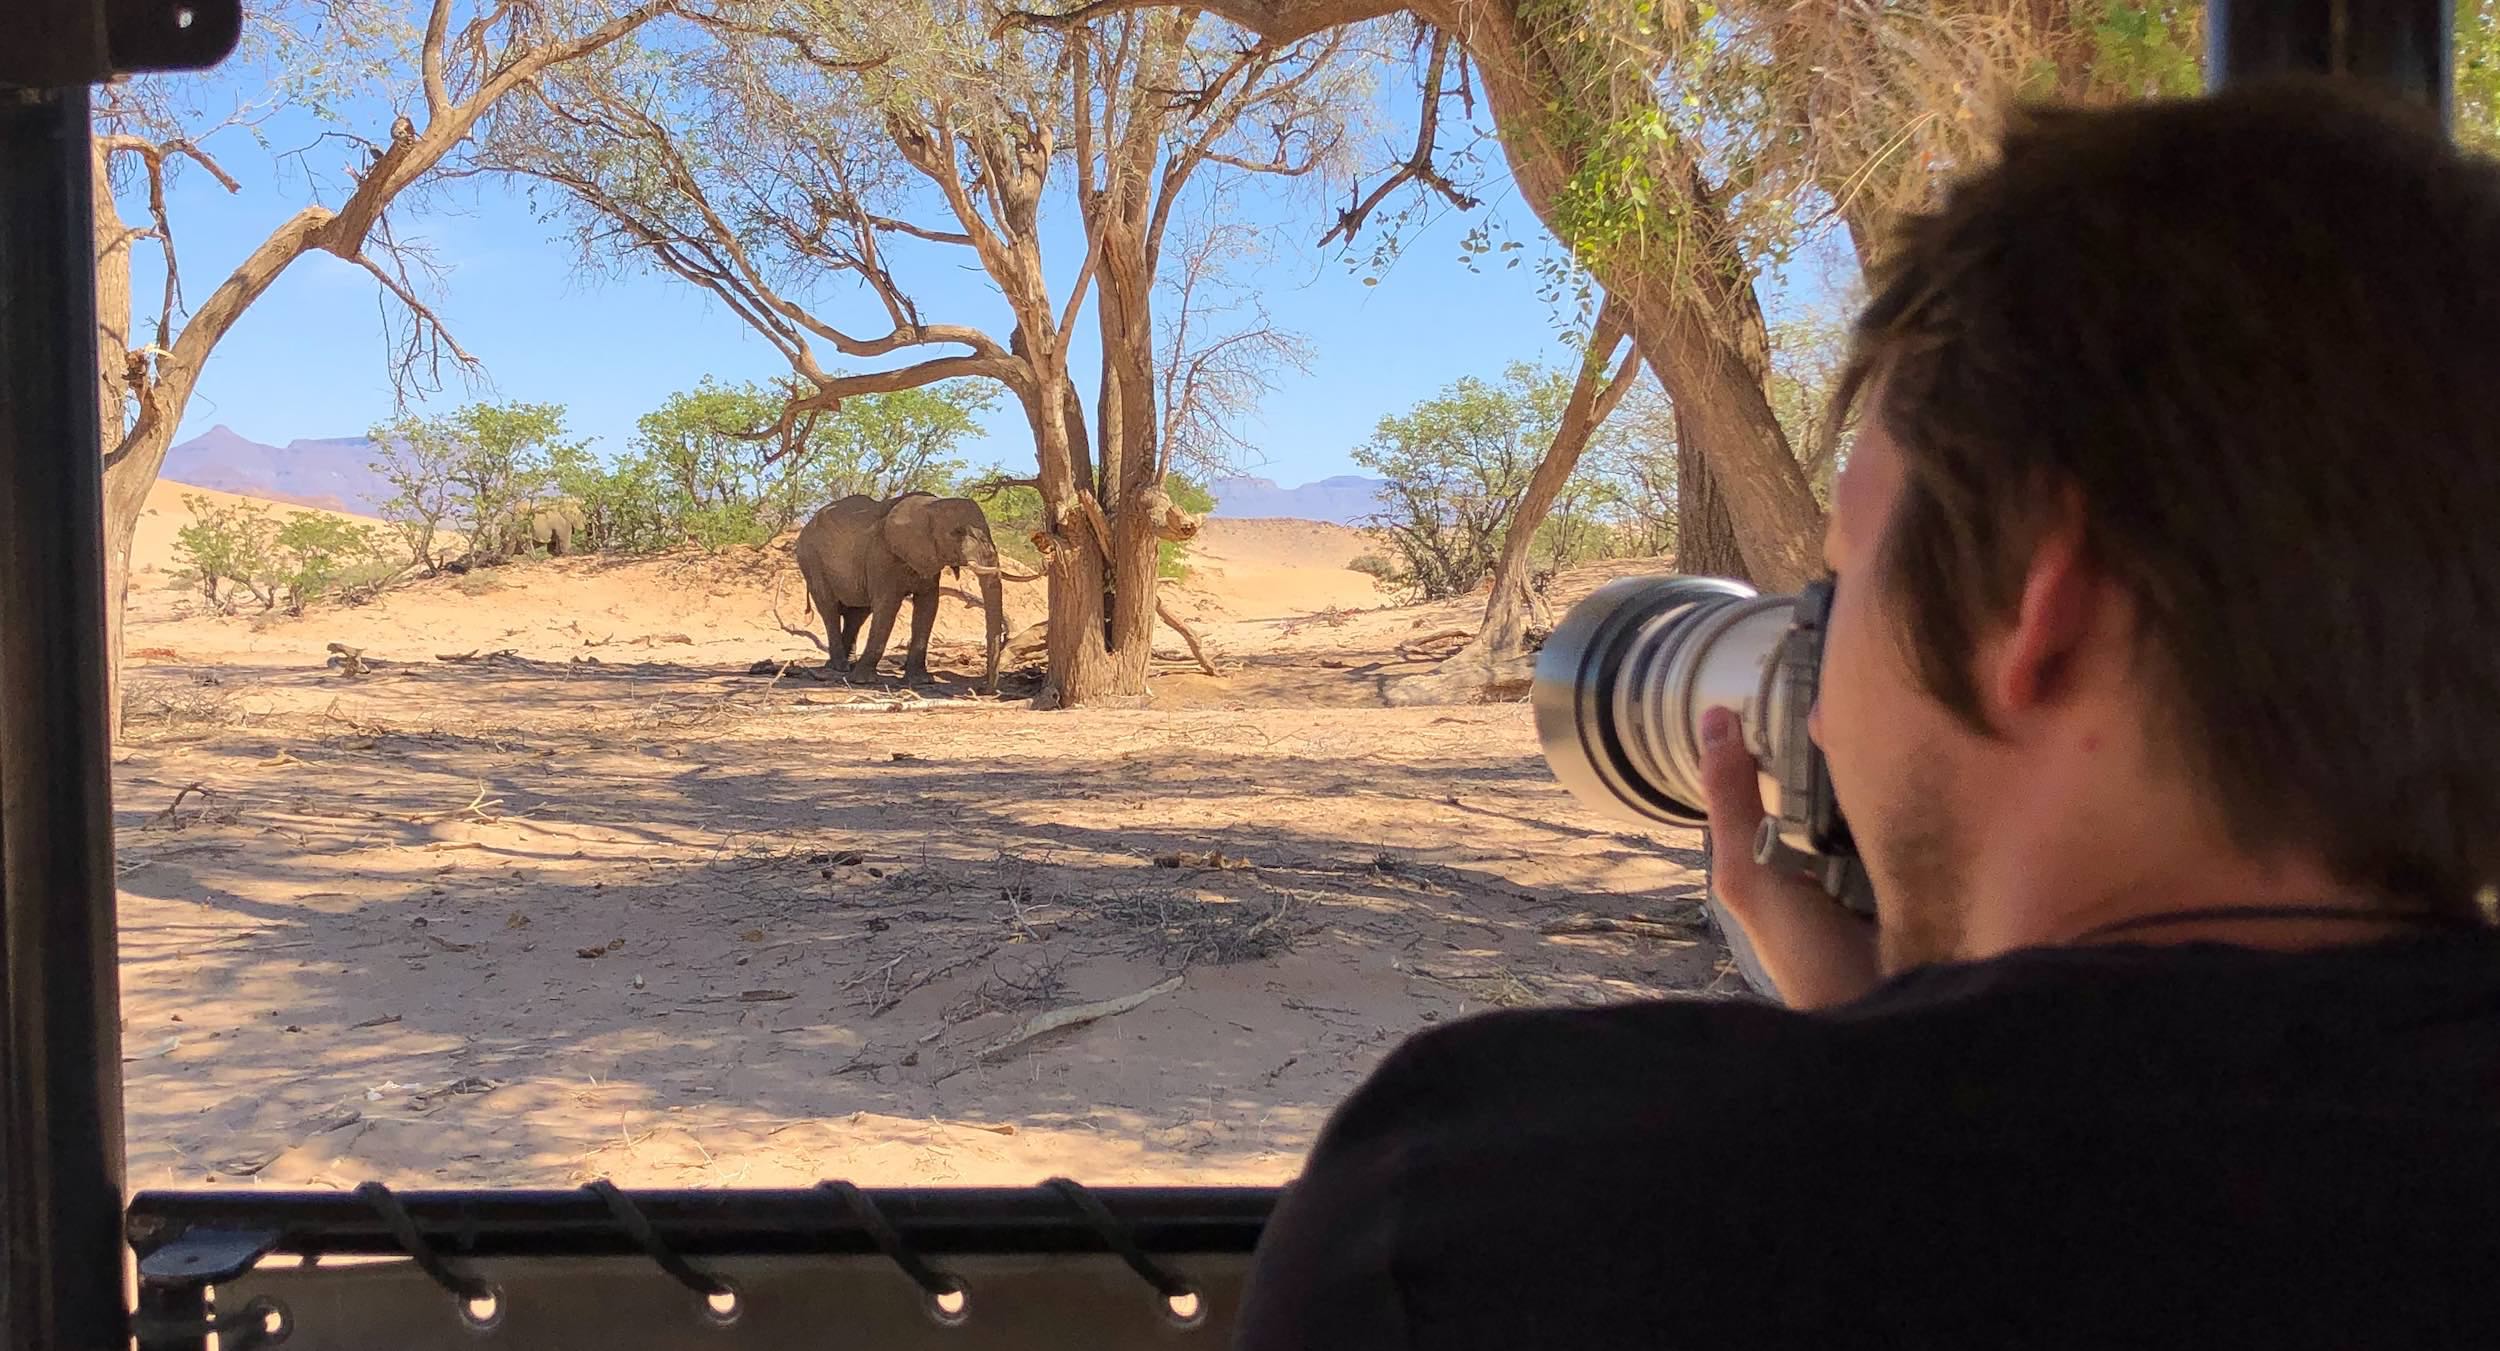 A tourist focusses a camera on an elephant from the safety of his vehicle.